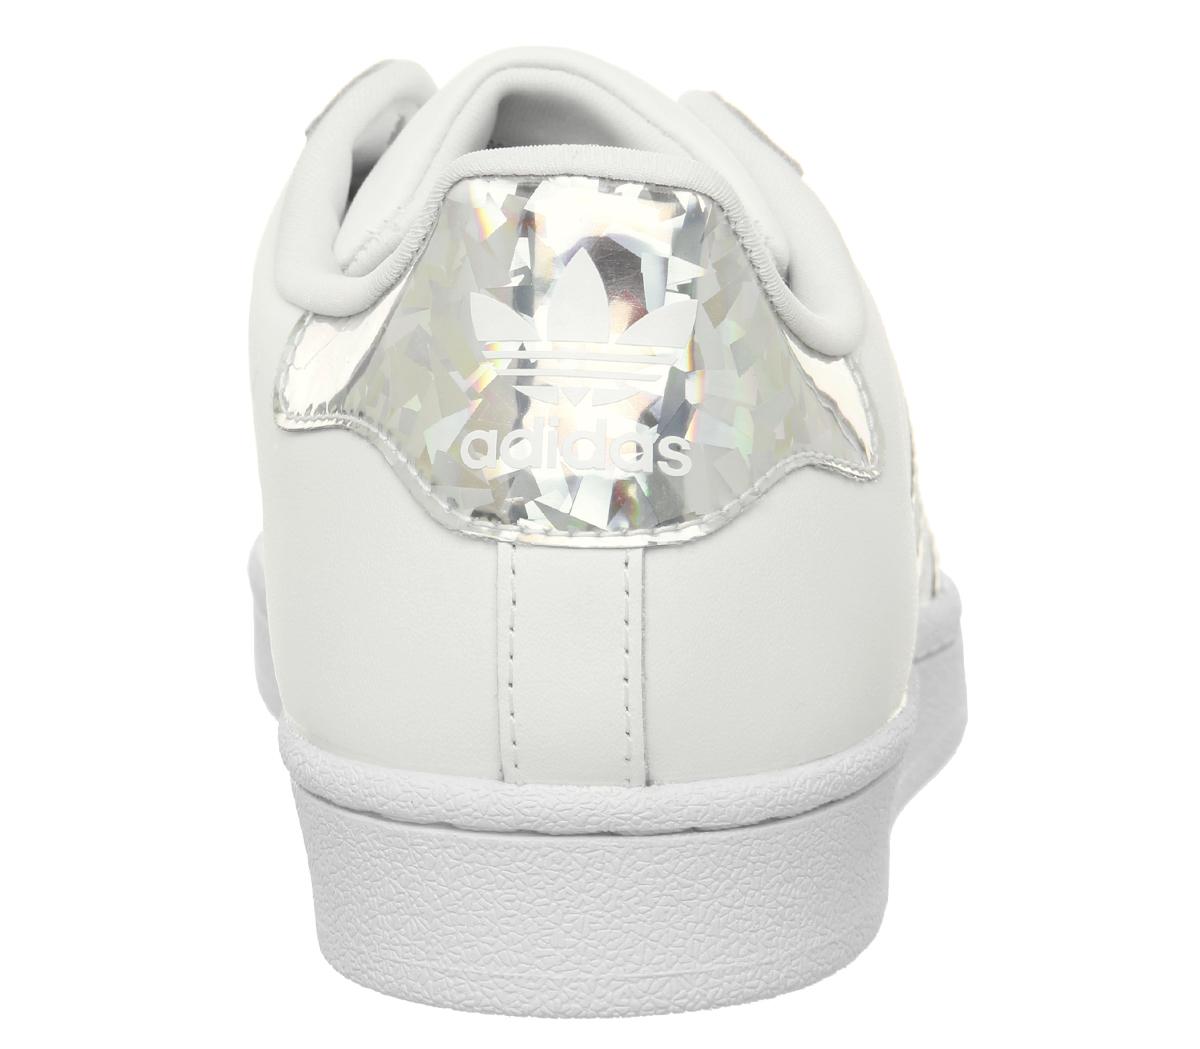 adidas superstar gs trainers white silver holographic